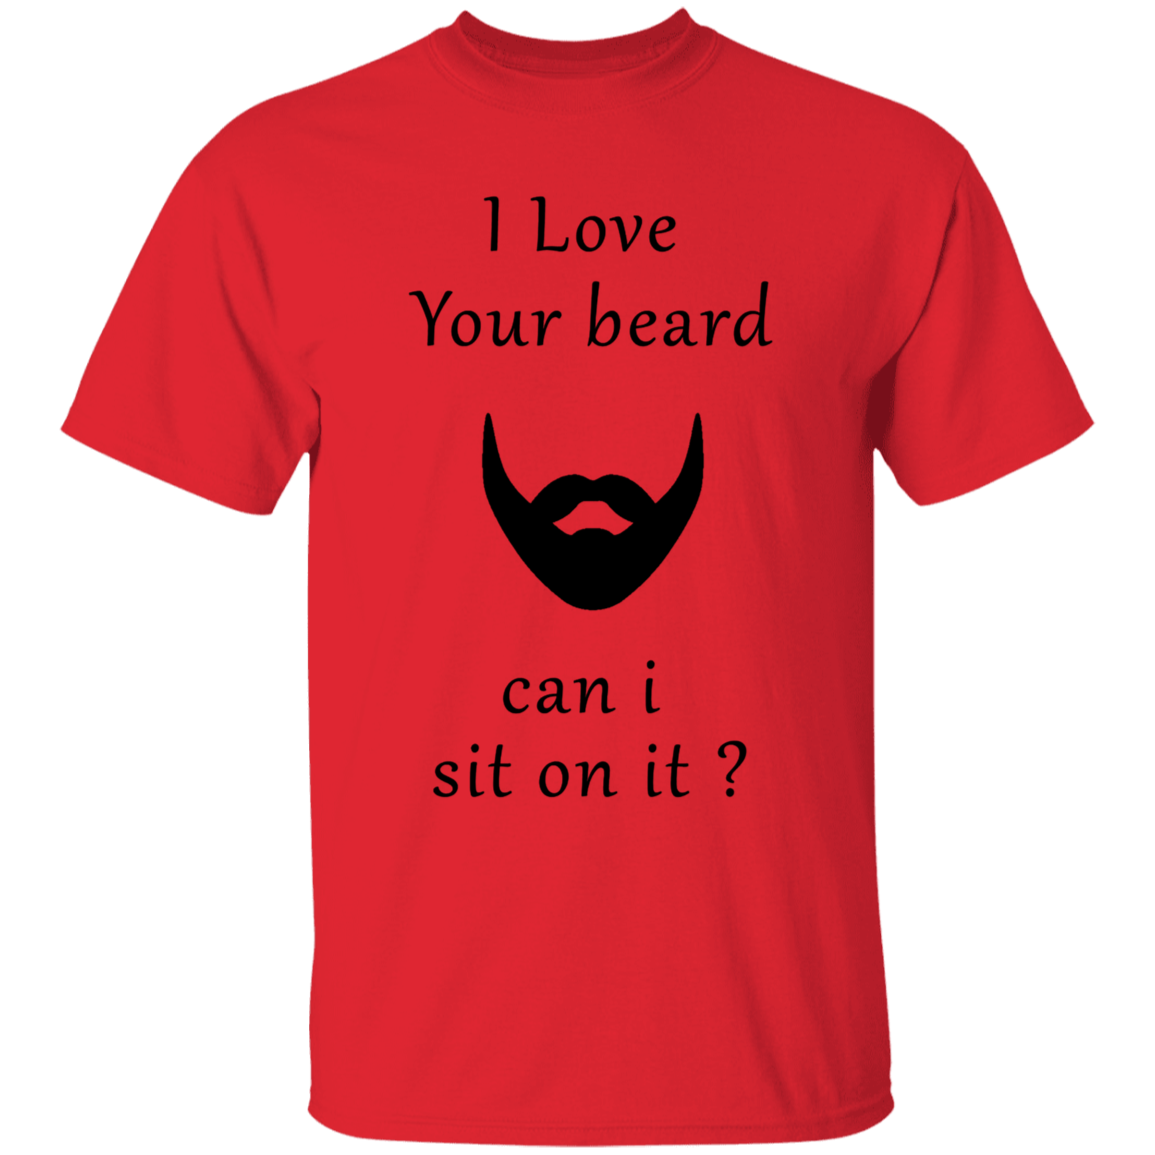 Love your Beard can I Sit on It Apparel